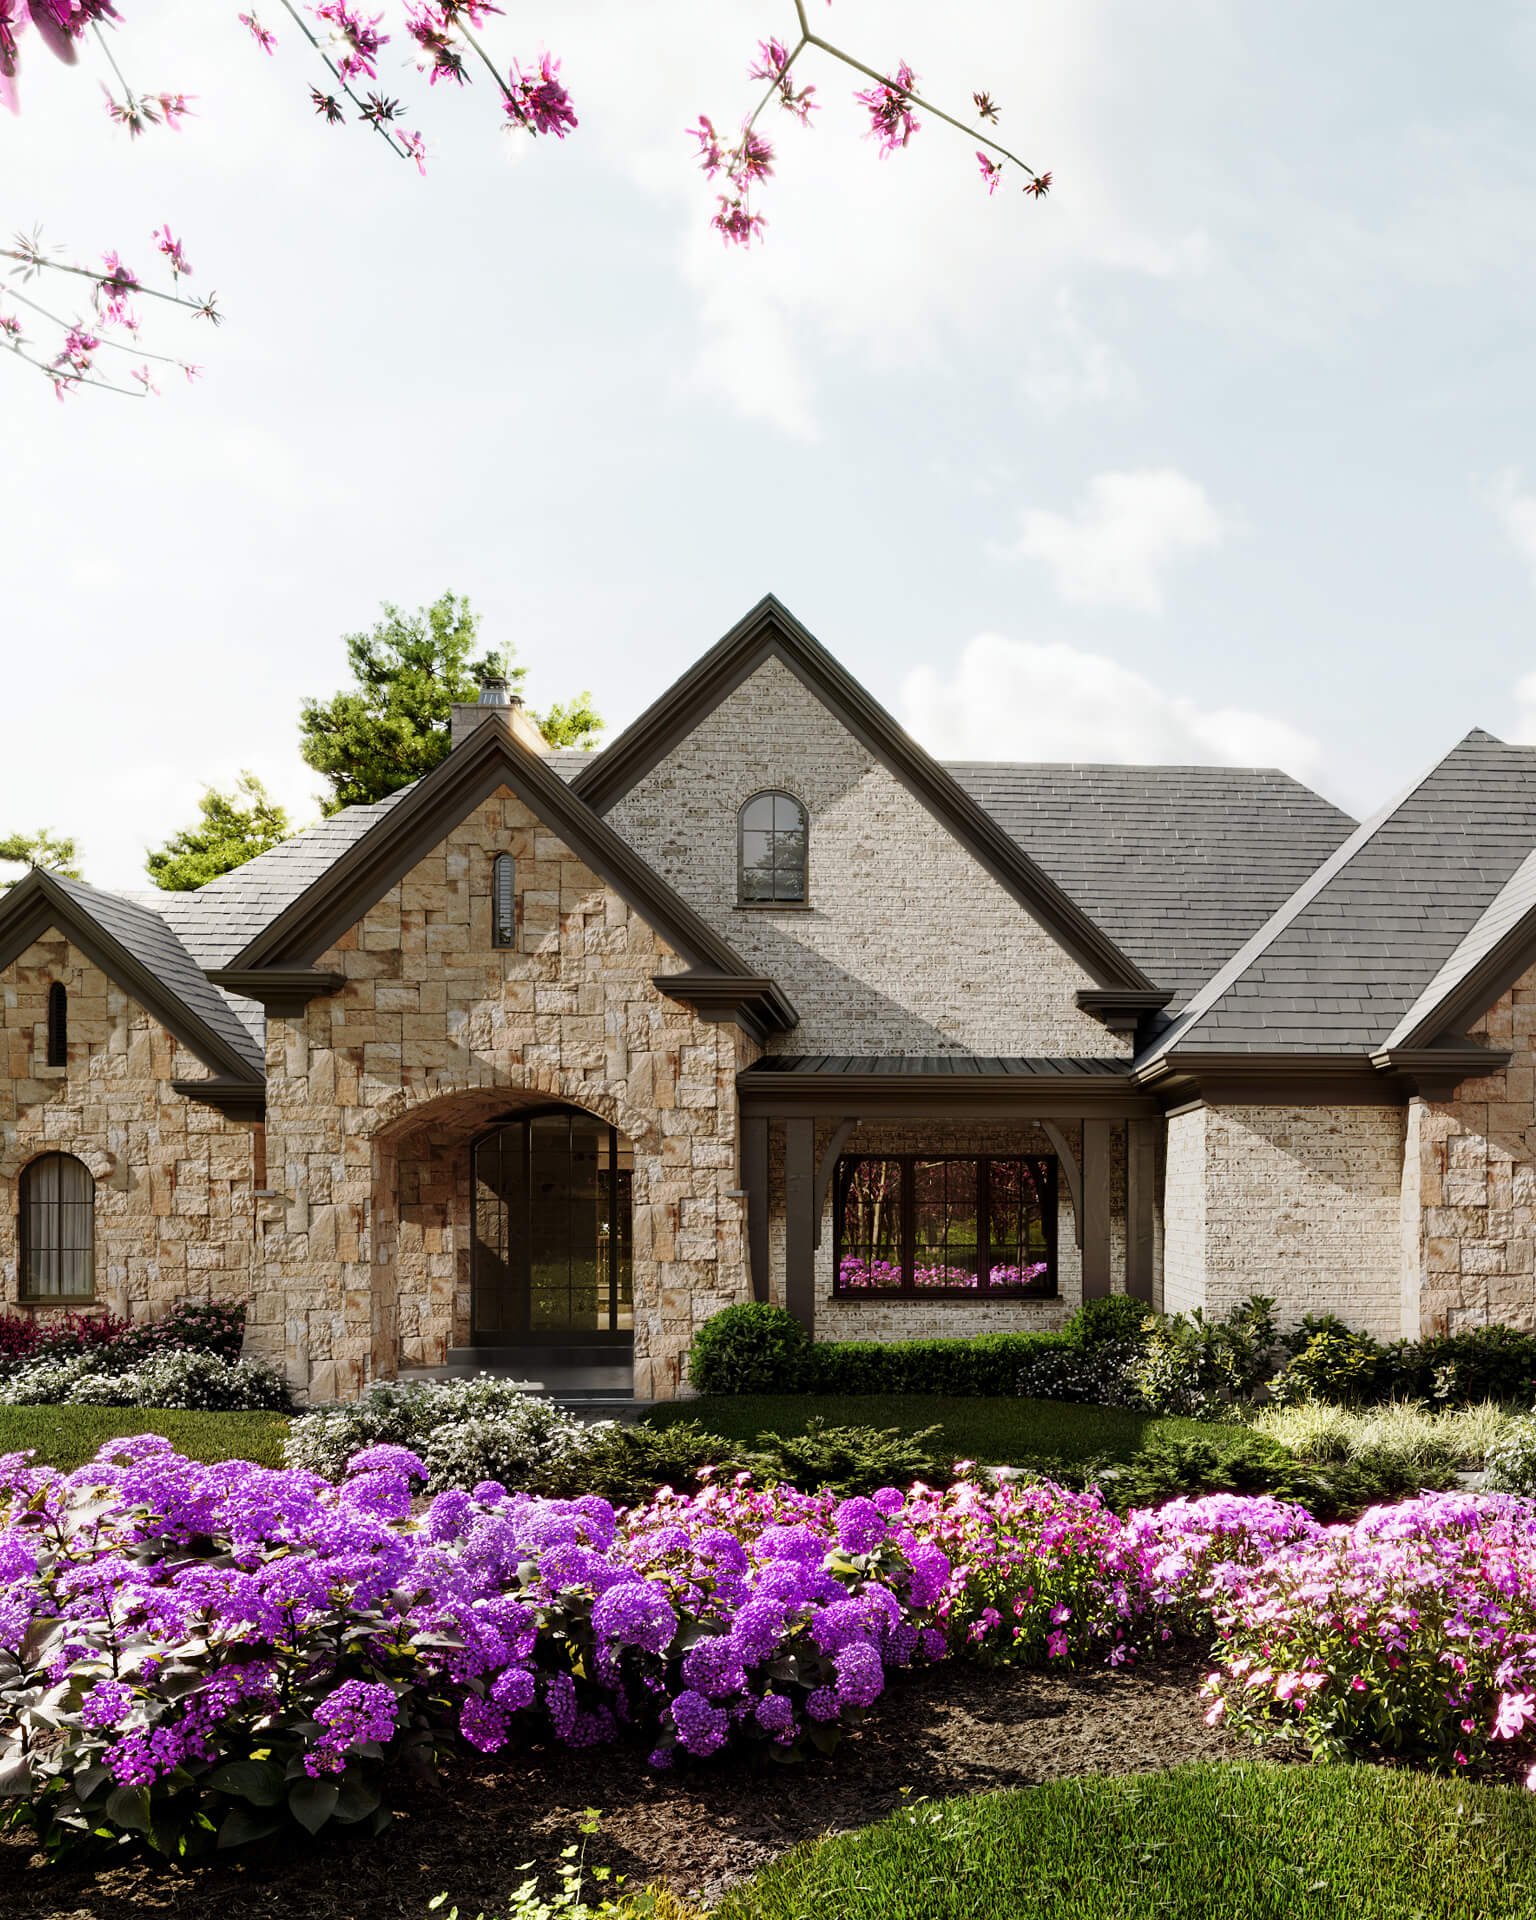 Single-Family House with a Flowering Lawn CG Image